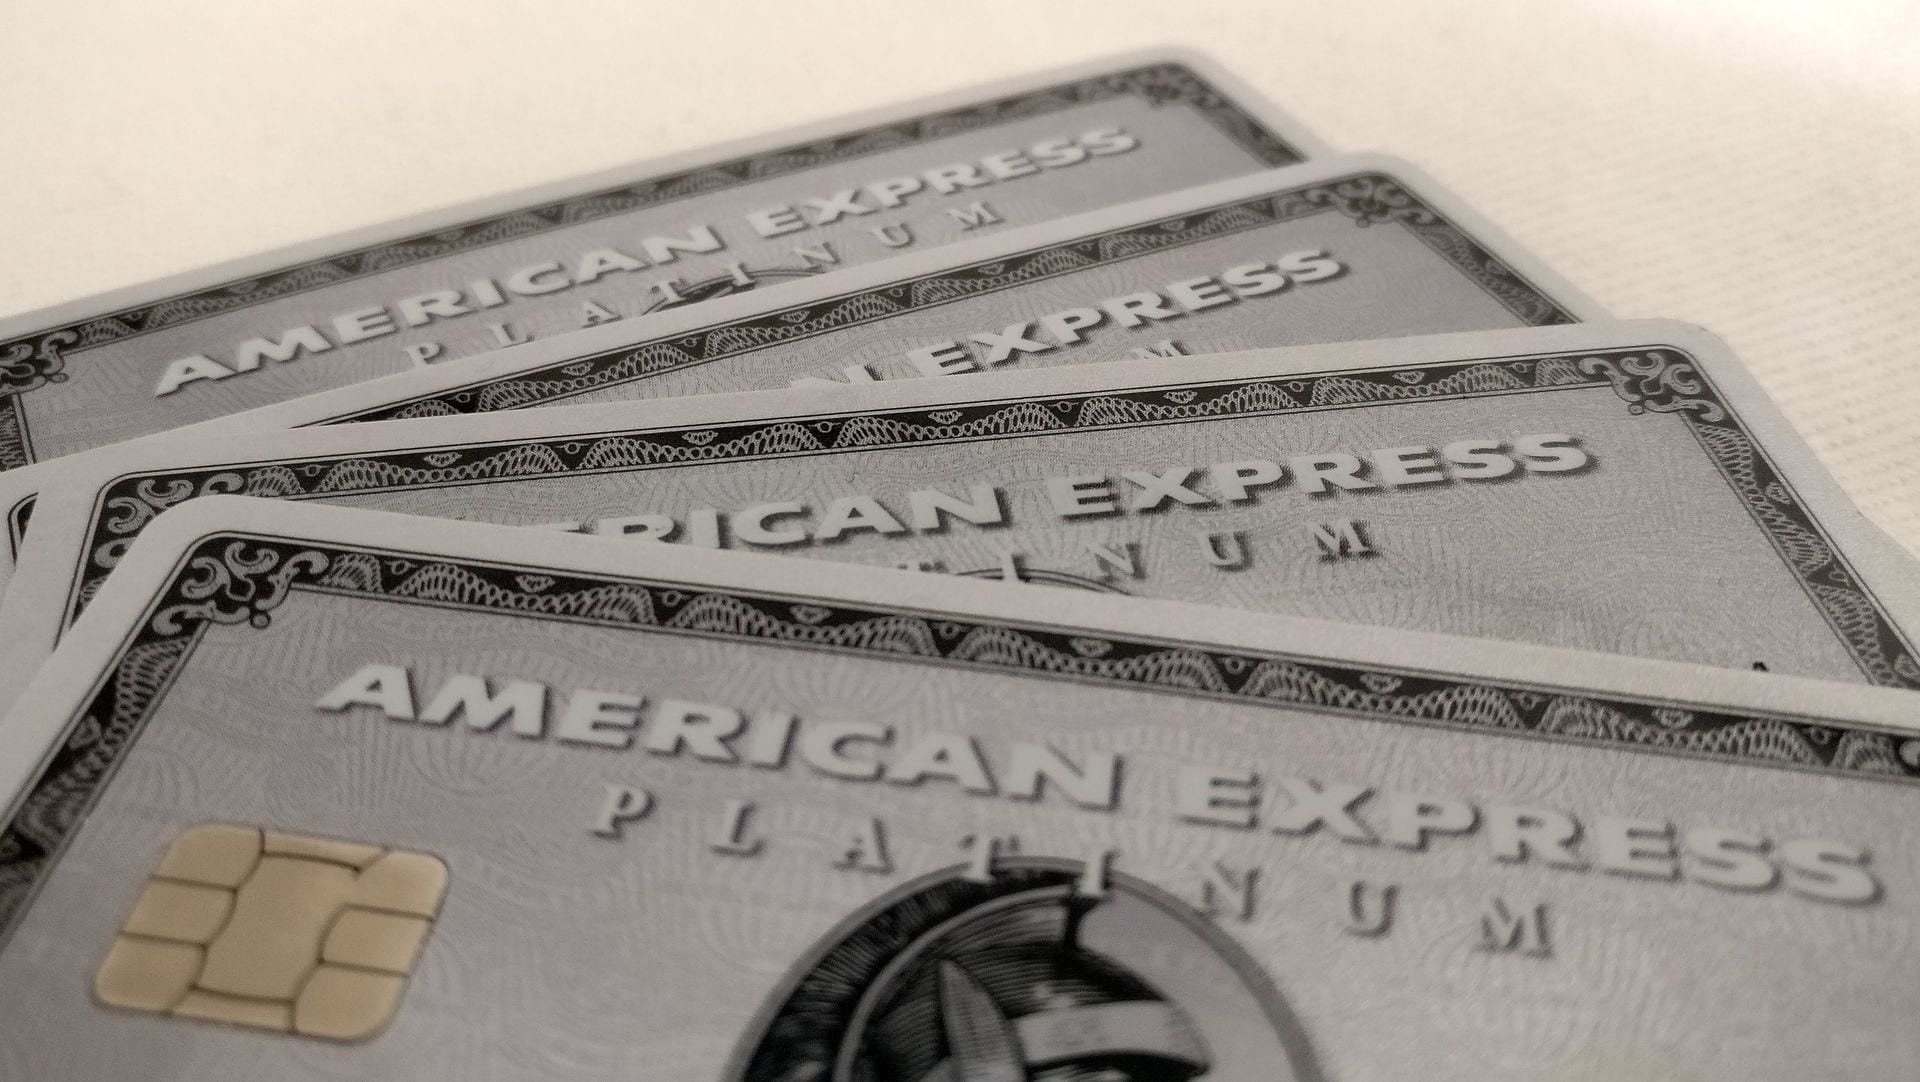 American Express: An industry-leading provider of charge cards, Offering month-to-month credit. 1920x1090 HD Wallpaper.